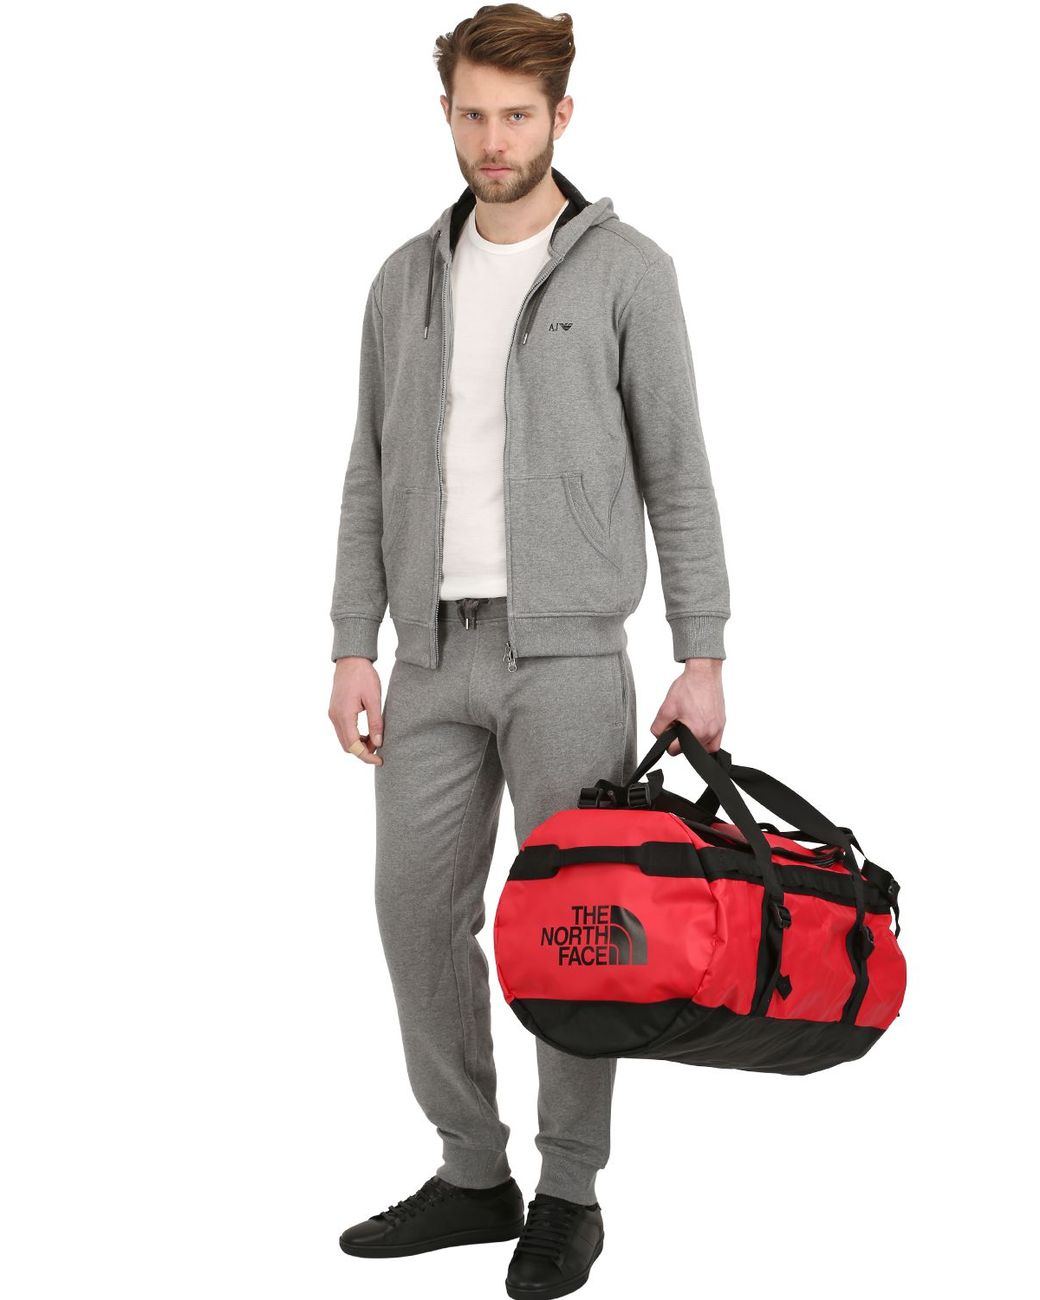 The Face BASE CAMP DUFFEL RED Ski Jackets And Gear, Winter Coats, Running, Tennis, Soccer, And From Top Brands Paragon Sports islamiyyat.com